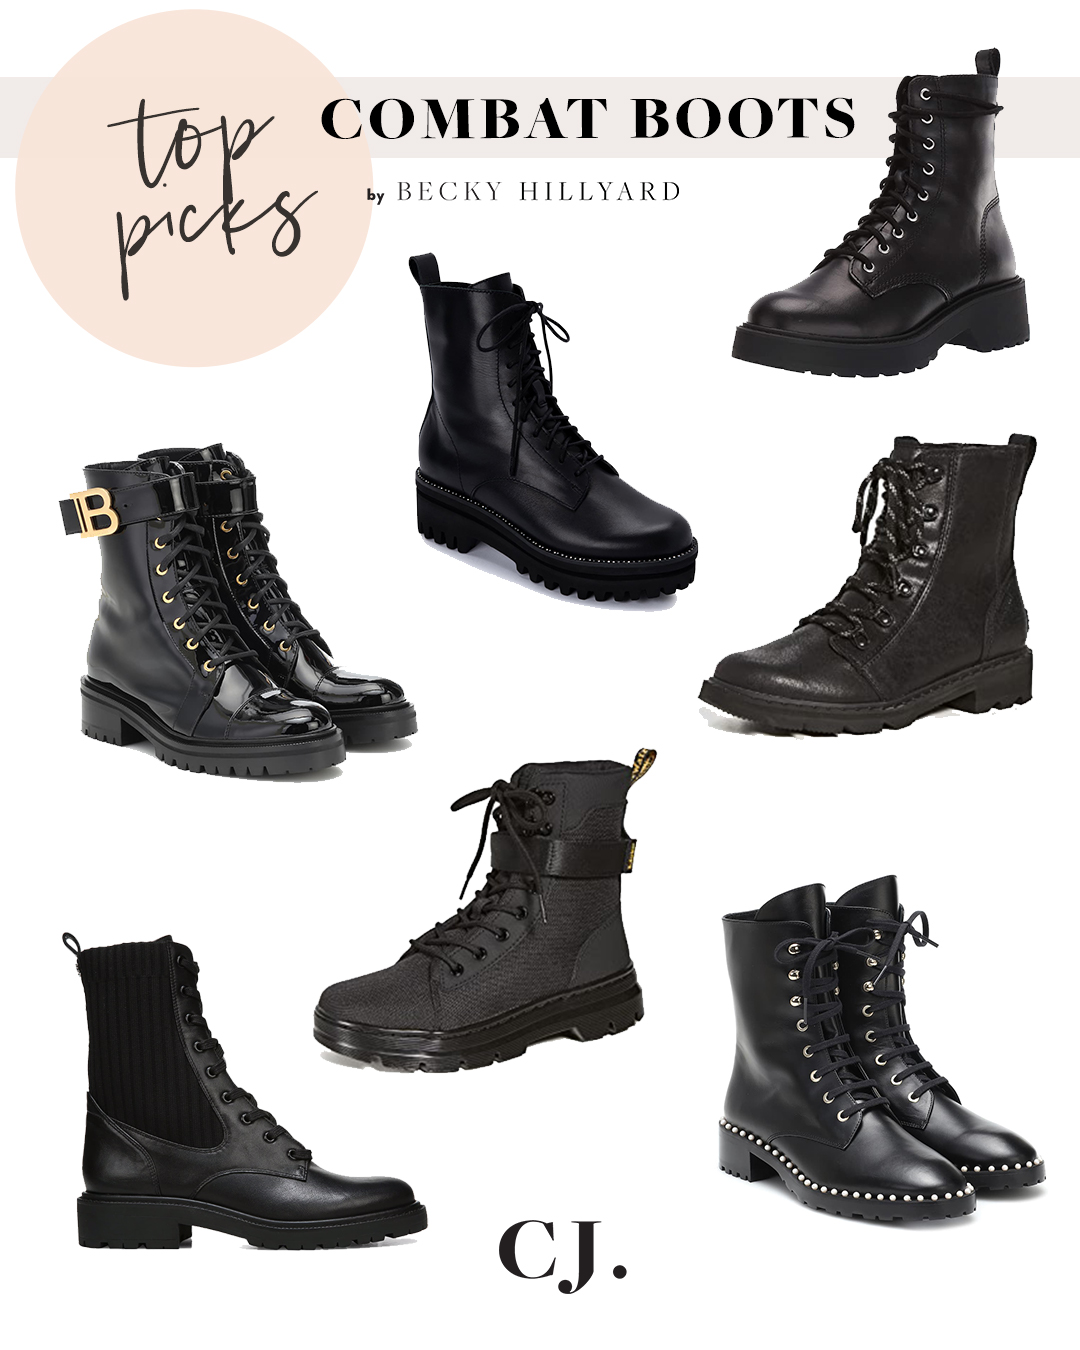 5 Ways to Wear Combat Boots